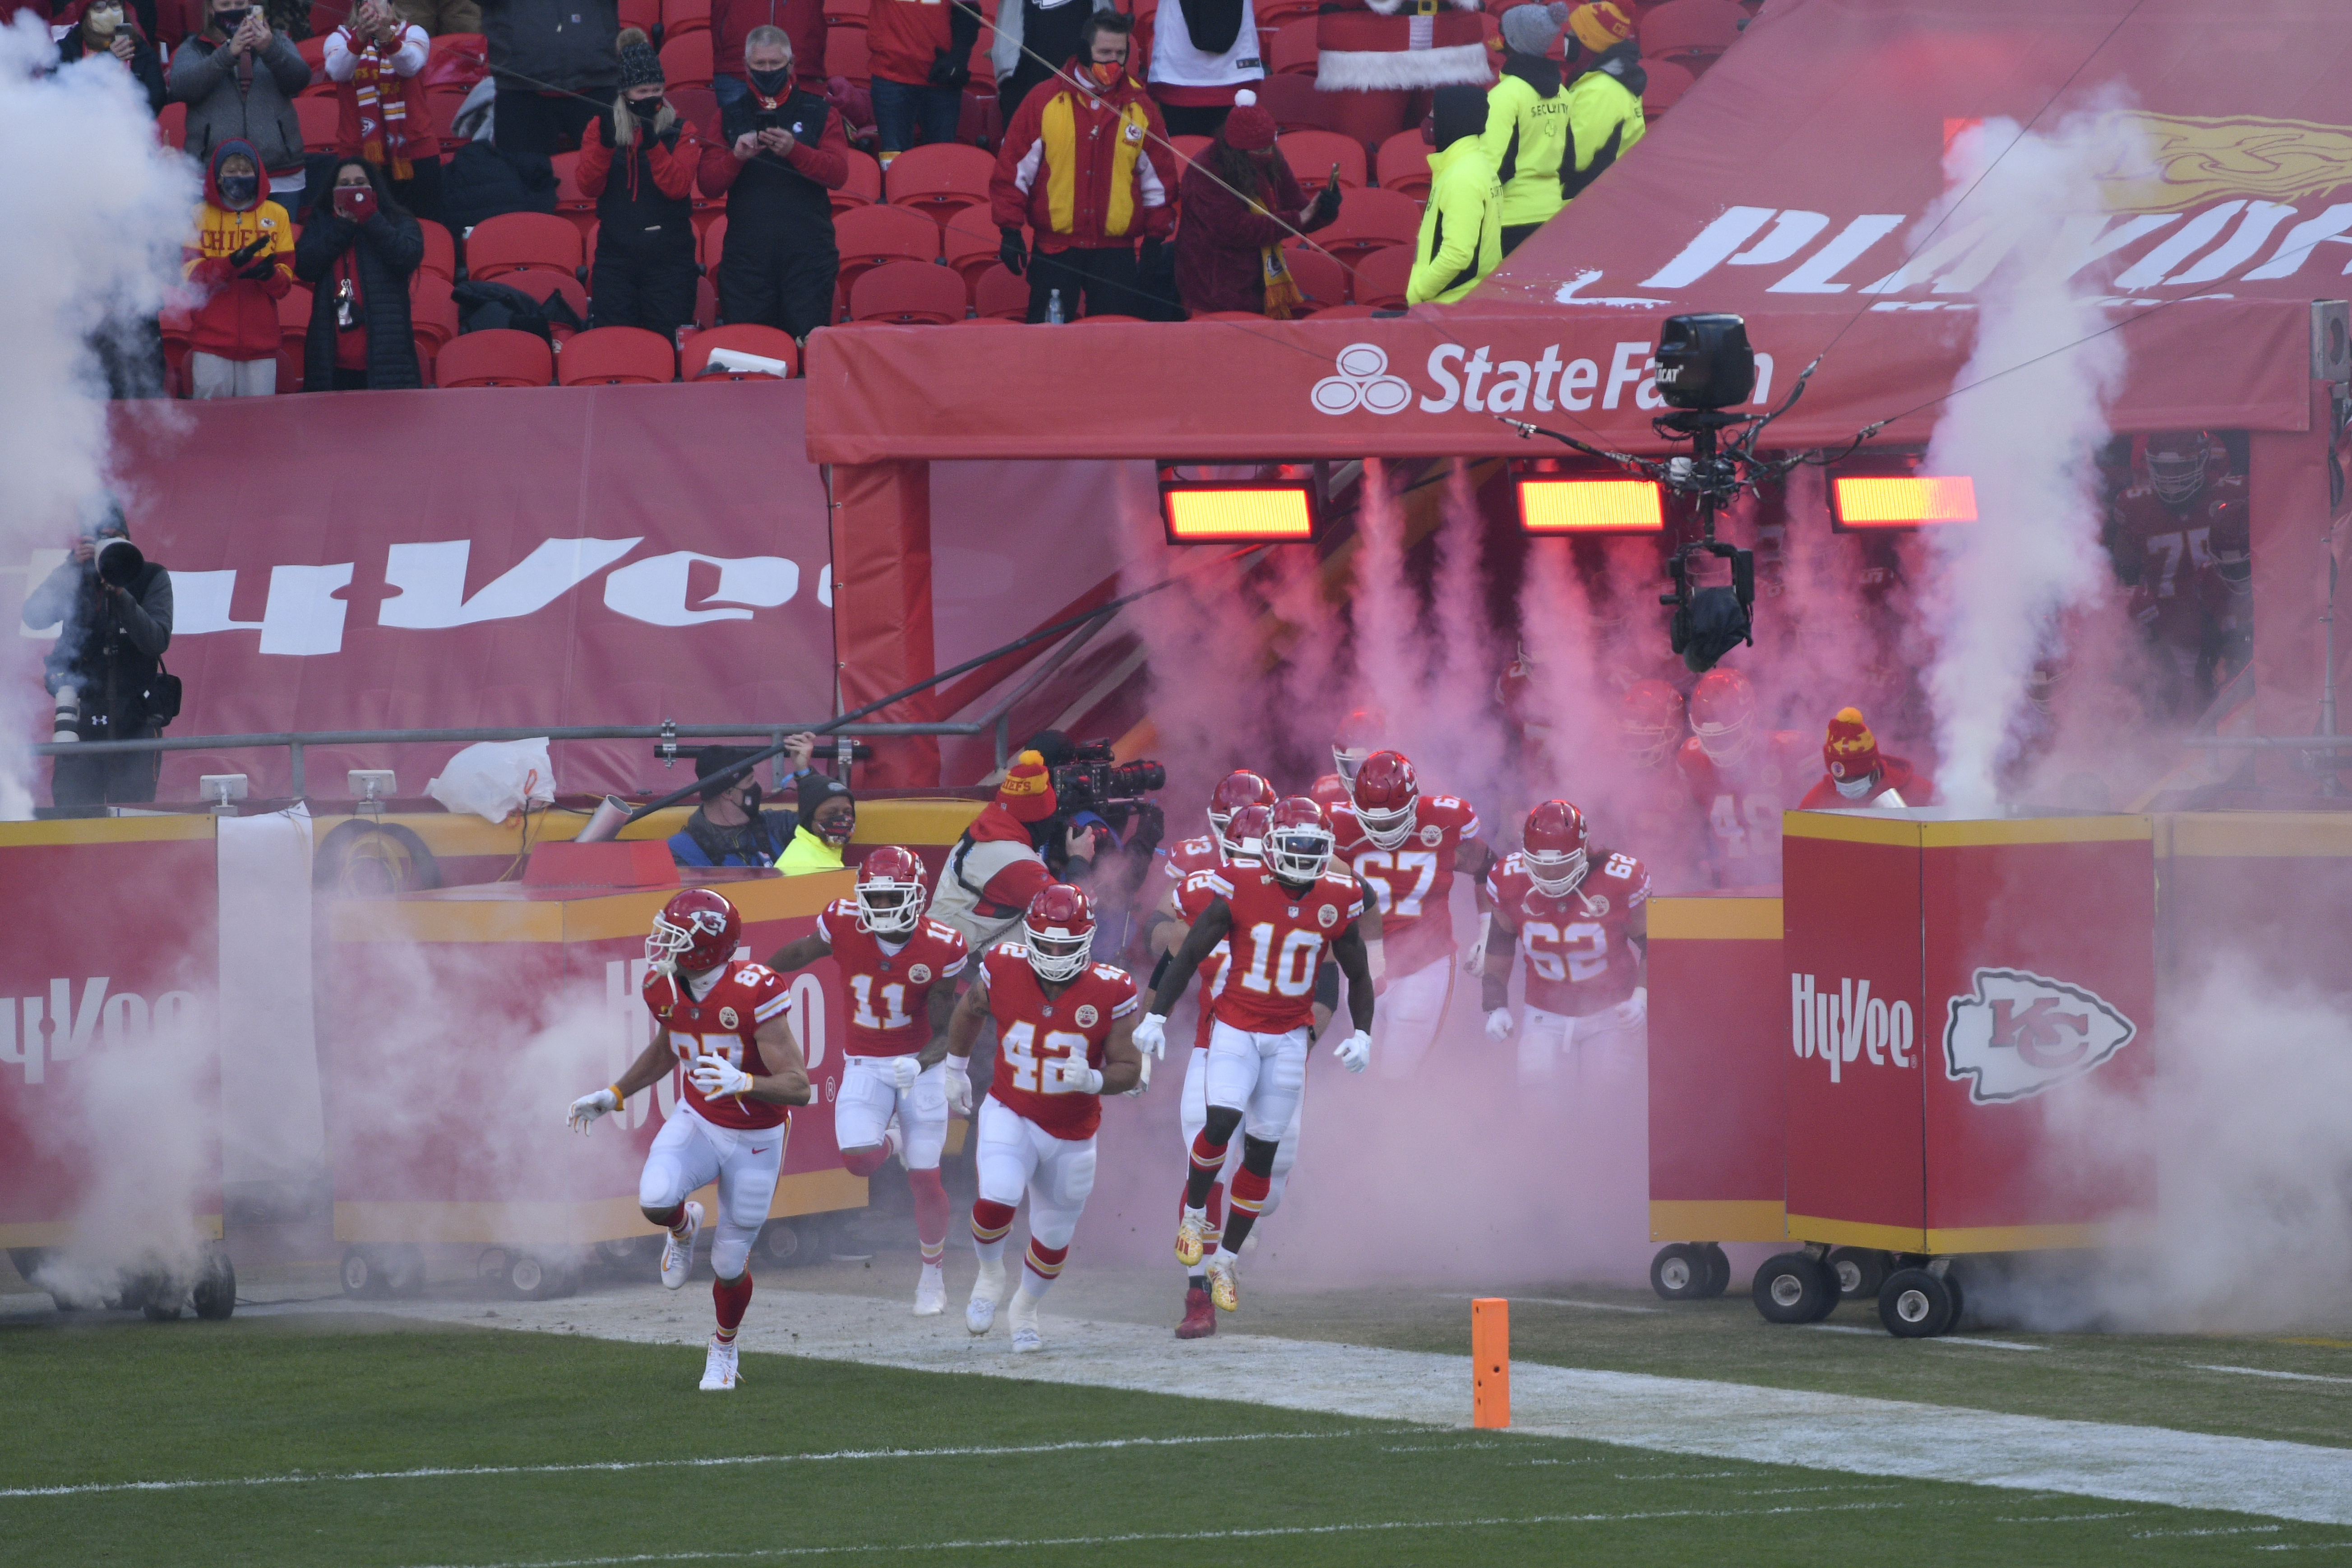 Chiefs beat Browns late with two touchdowns in 3:06